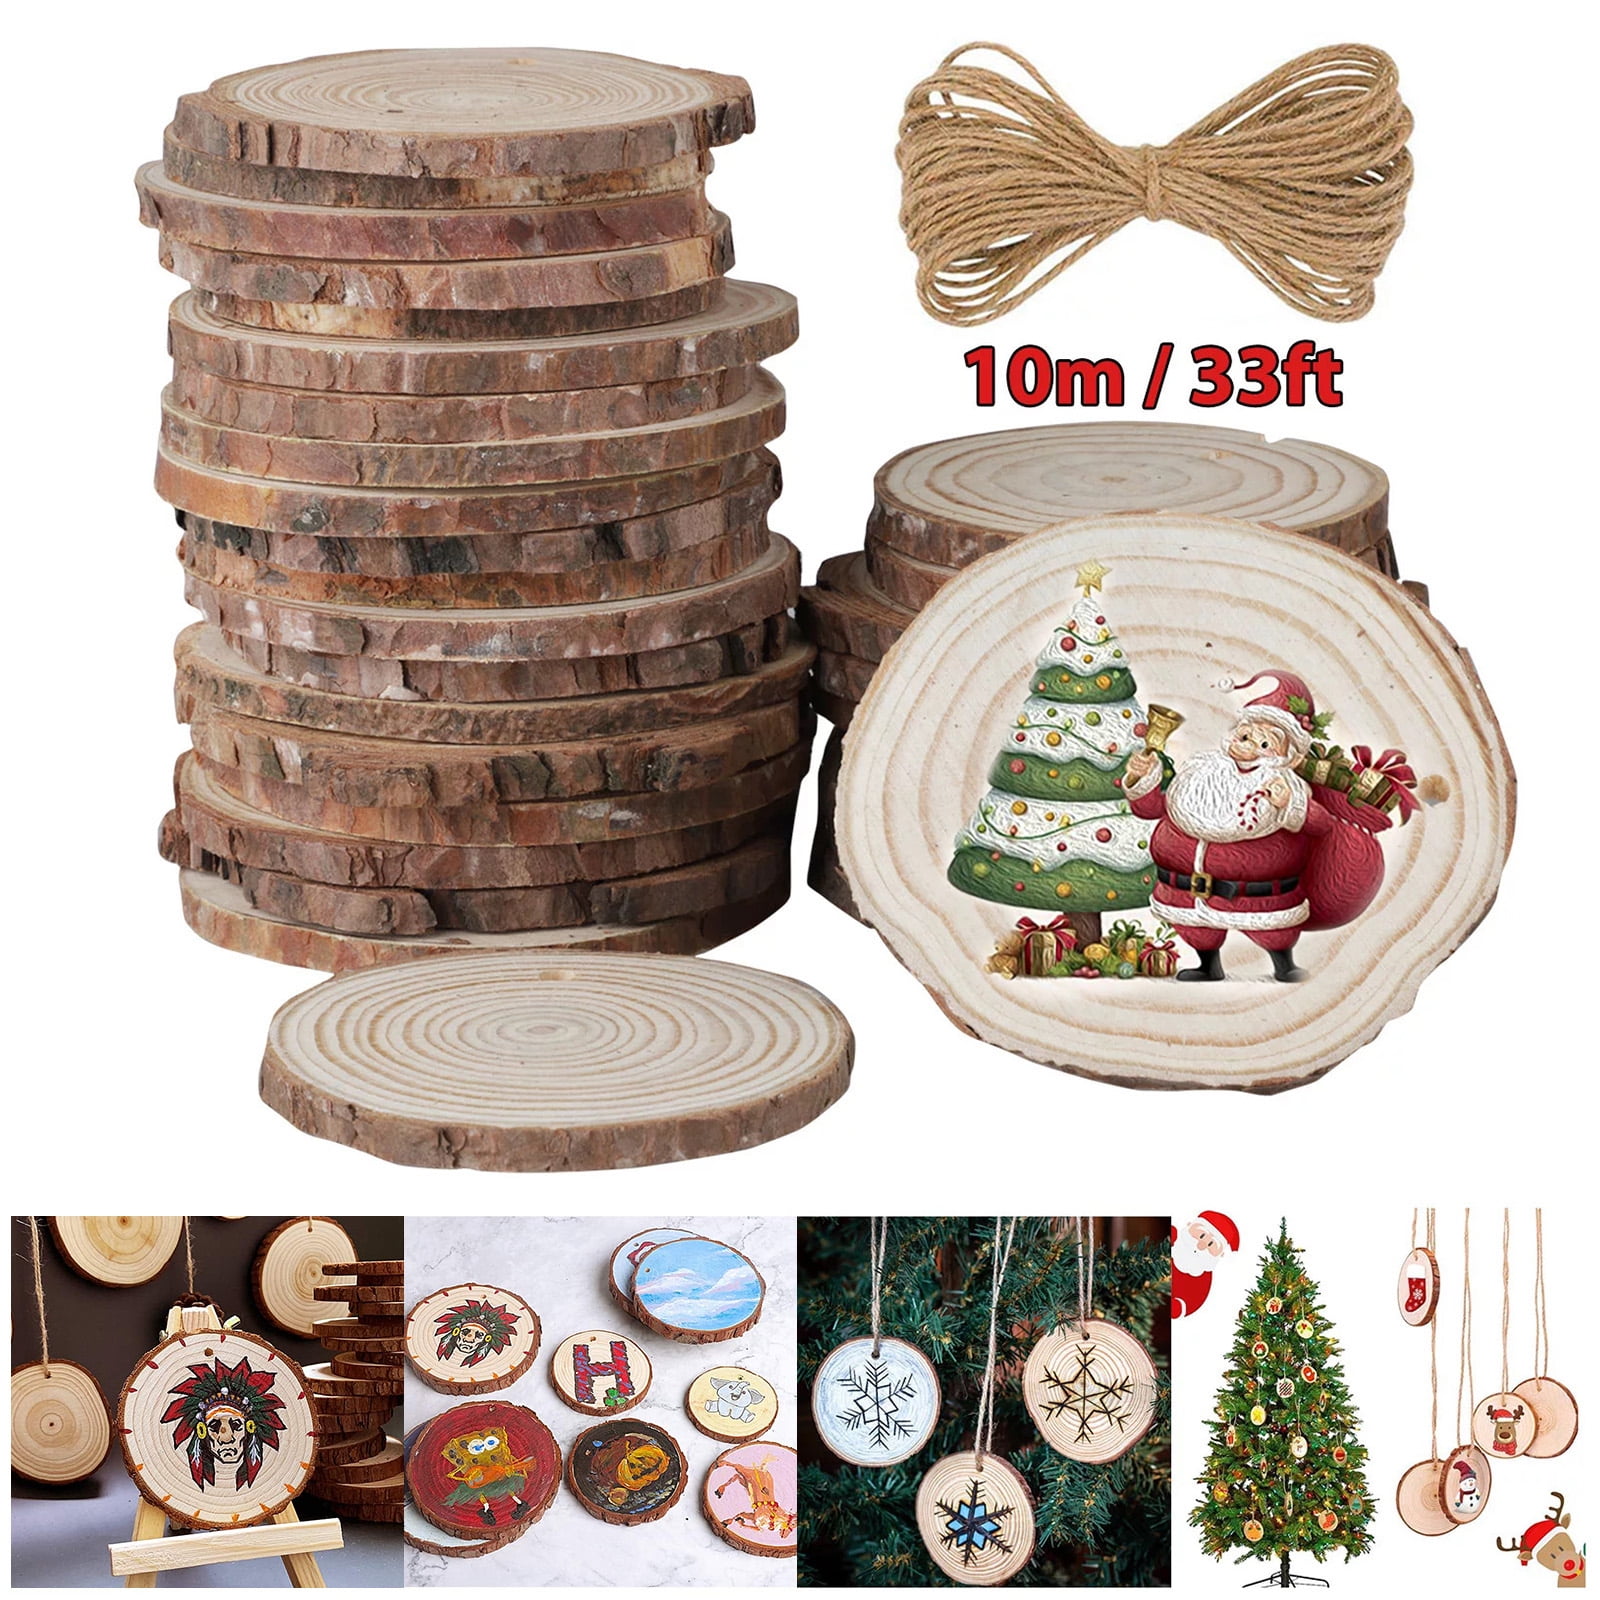 Wood Ornaments 30 Pcs 2.3-2.8 Inches Gbivbe Wood Slices Unfinished Natural Wooden Predrilled Wood Craft Kit with Hole Wooden Circles Tree Slices for Arts and Crafts Christmas Ornament DIY Crafts 